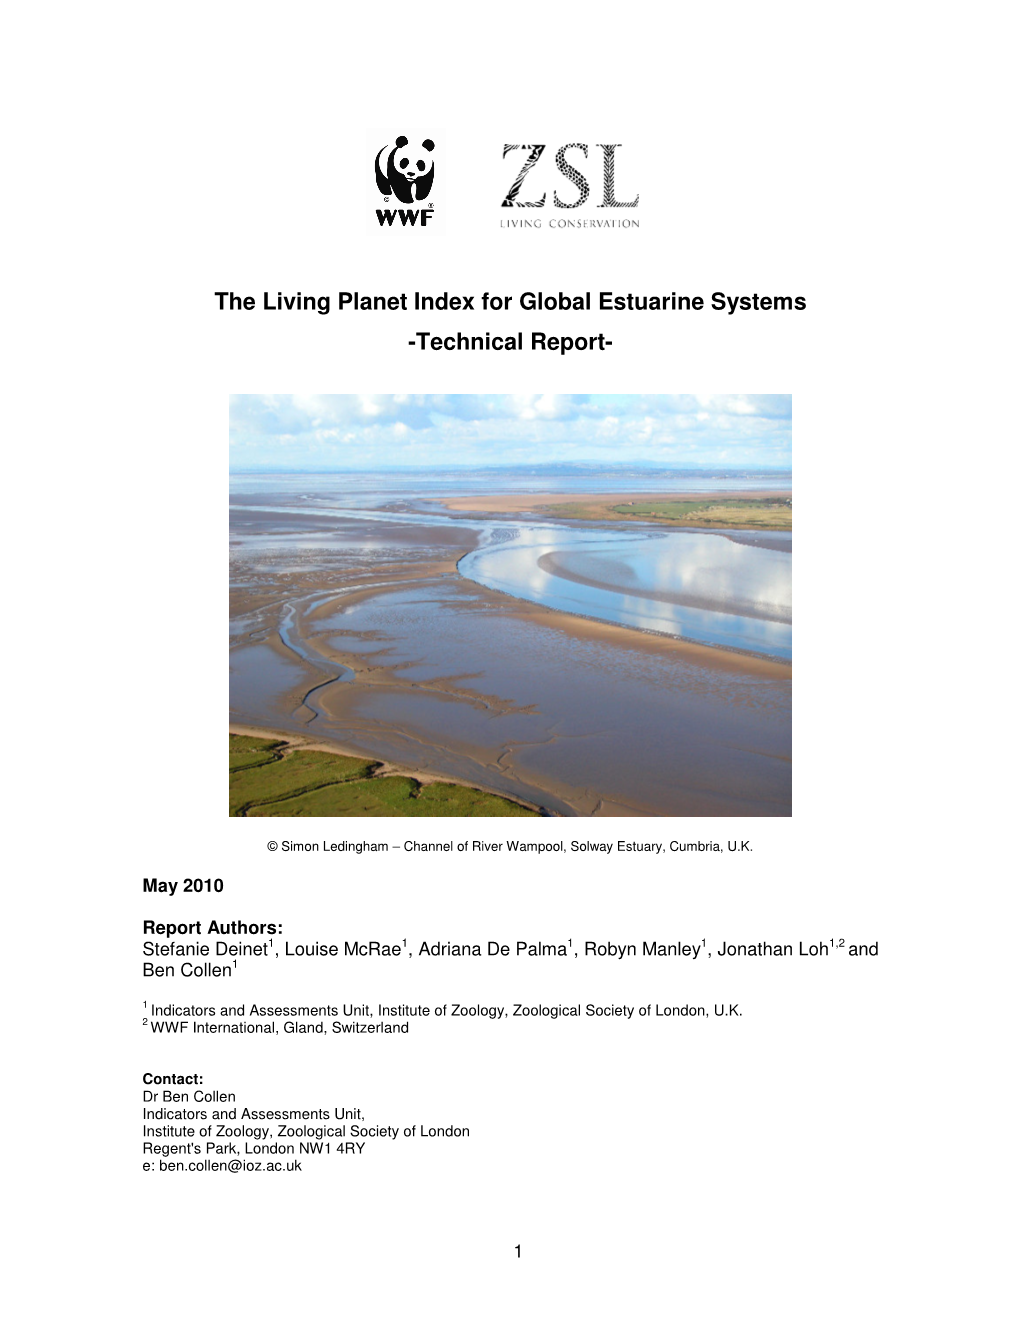 The Living Planet Index for Global Estuarine Systems -Technical Report